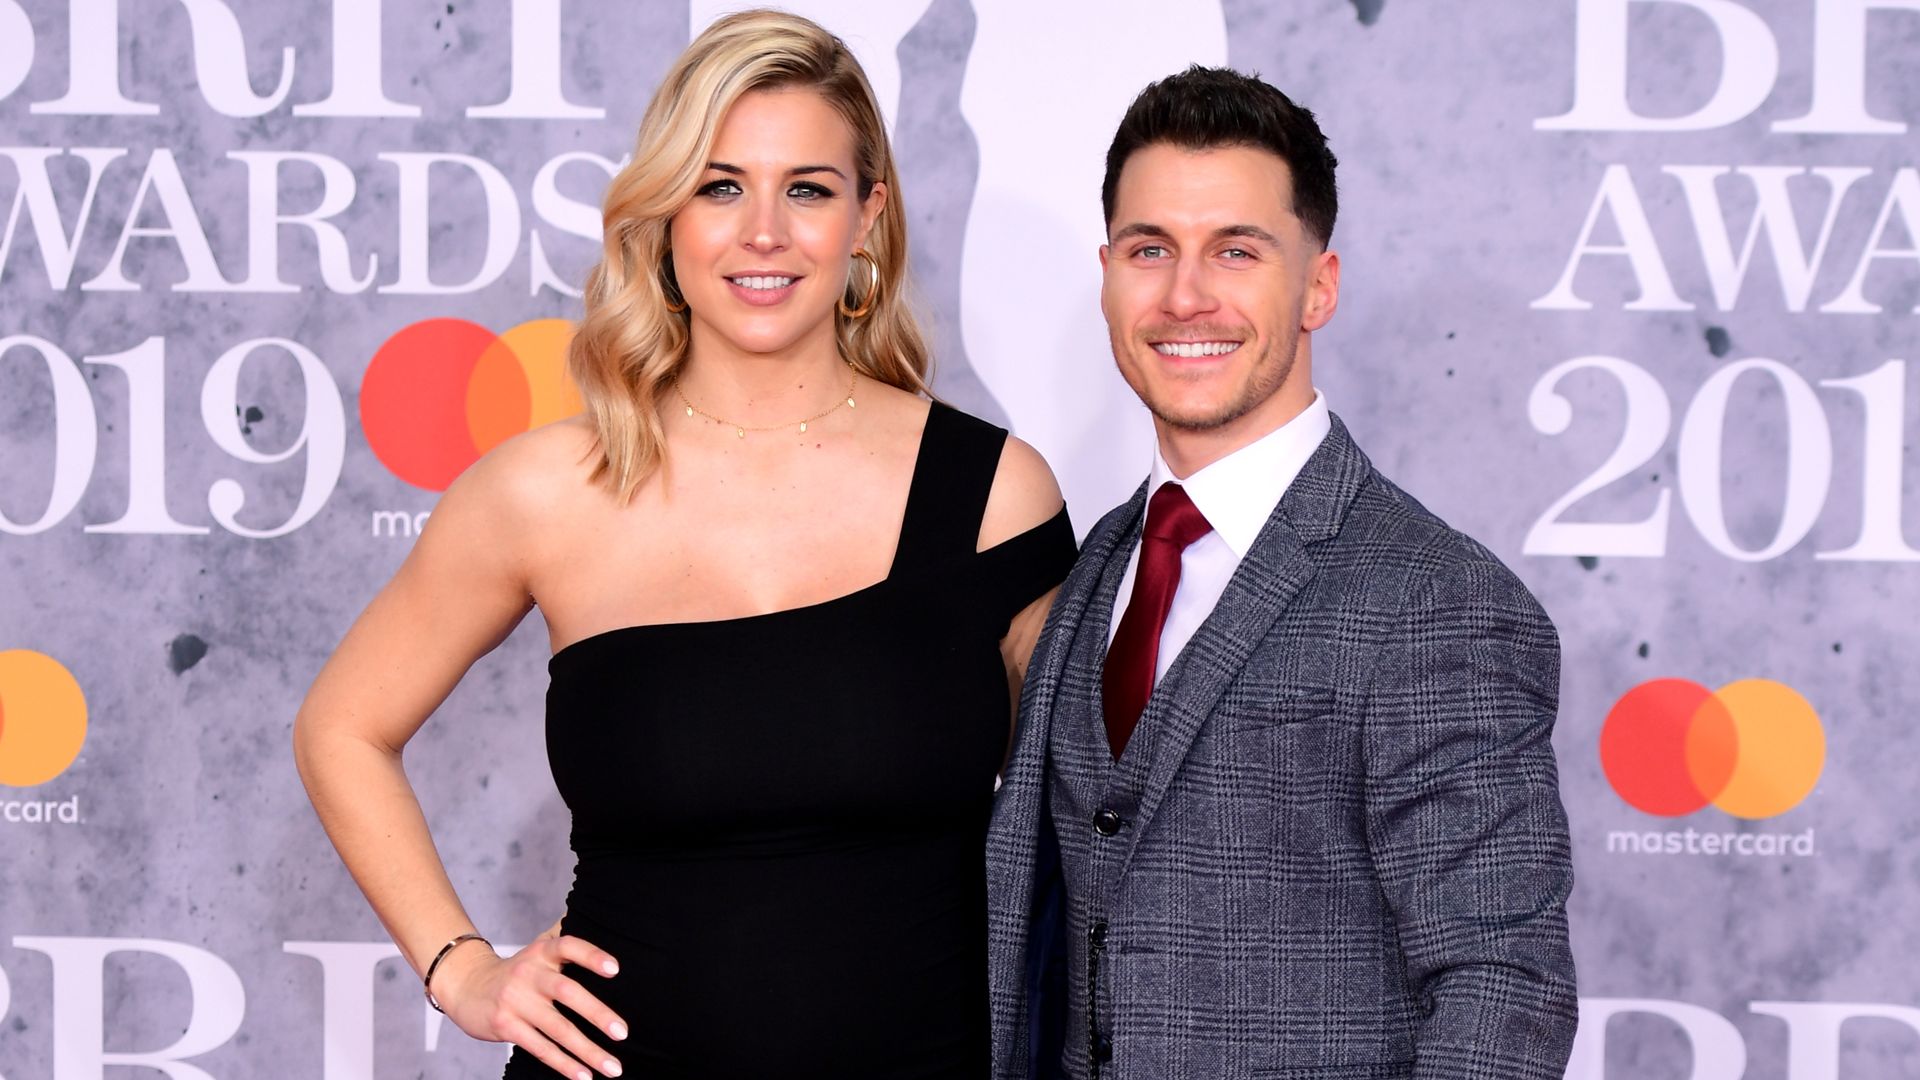 Gemma Atkinson and Gorka Marquez are expecting baby number two